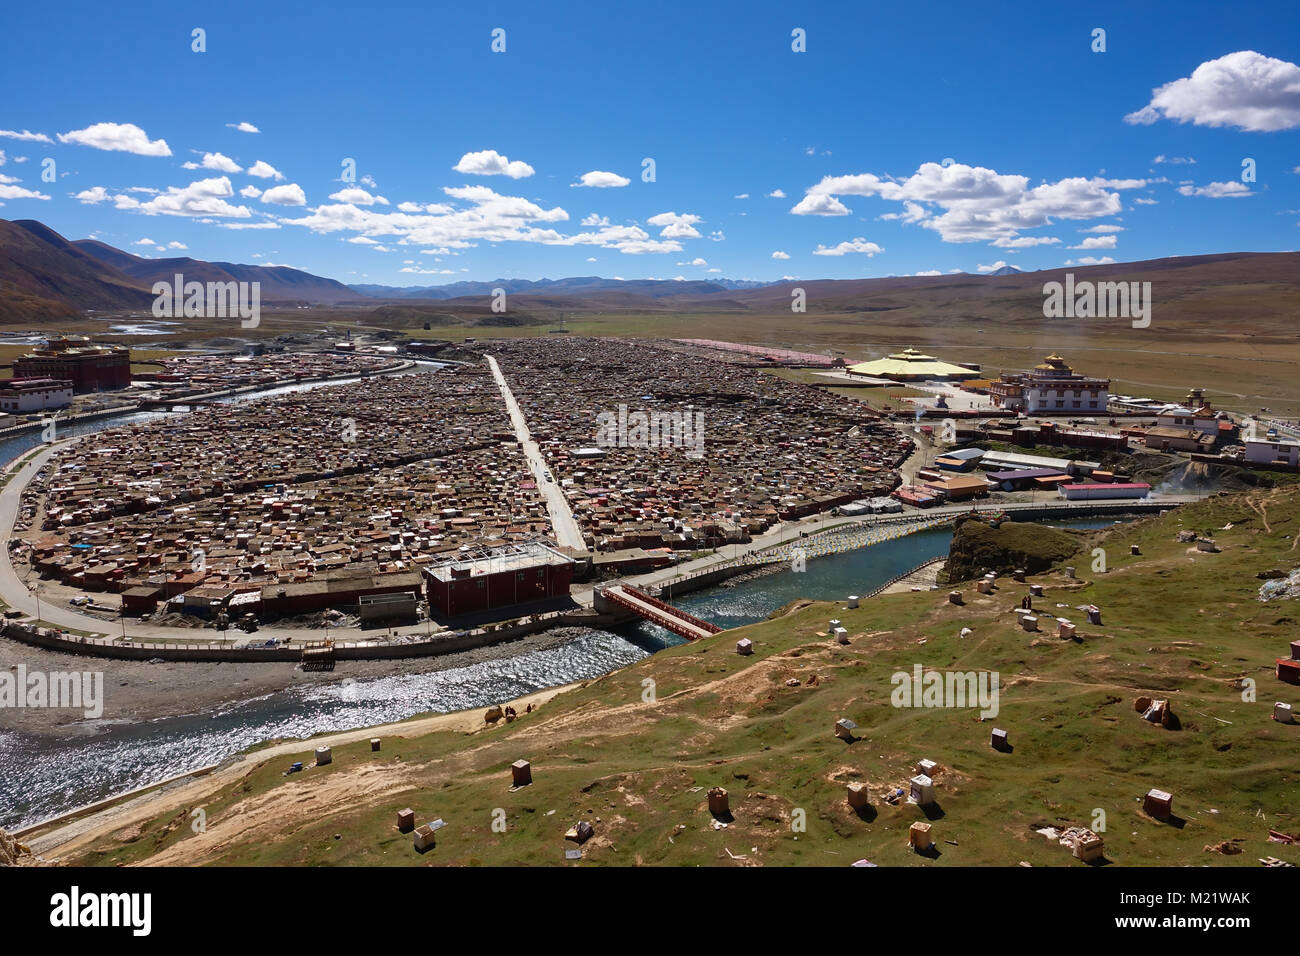 View of the Yarchen Gar Monastery with many shacks for monks in Garze Tibetan, Sichuan, China. Stock Photo